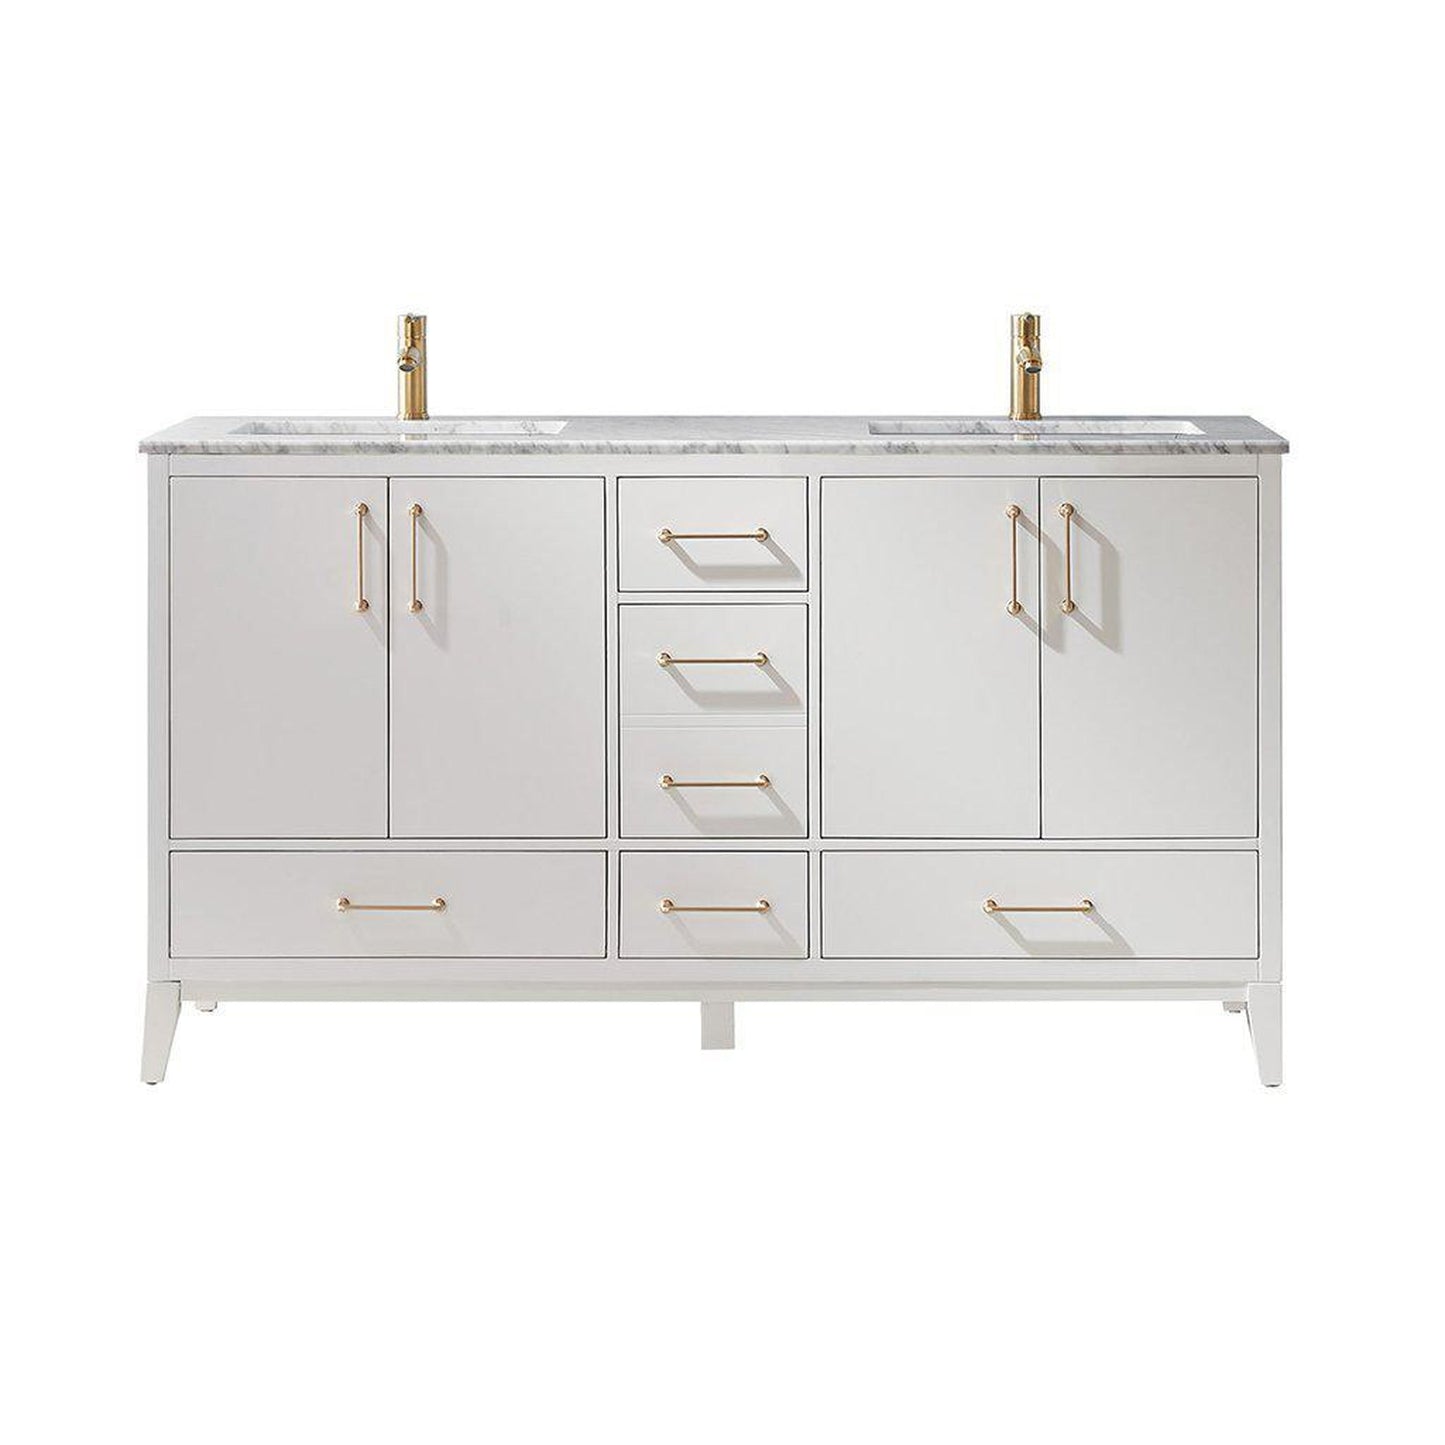 Altair Sutton 60" Double White Freestanding Bathroom Vanity Set With Natural Carrara White Marble Two Rectangular Undermount Ceramic Sinks, and Overflow